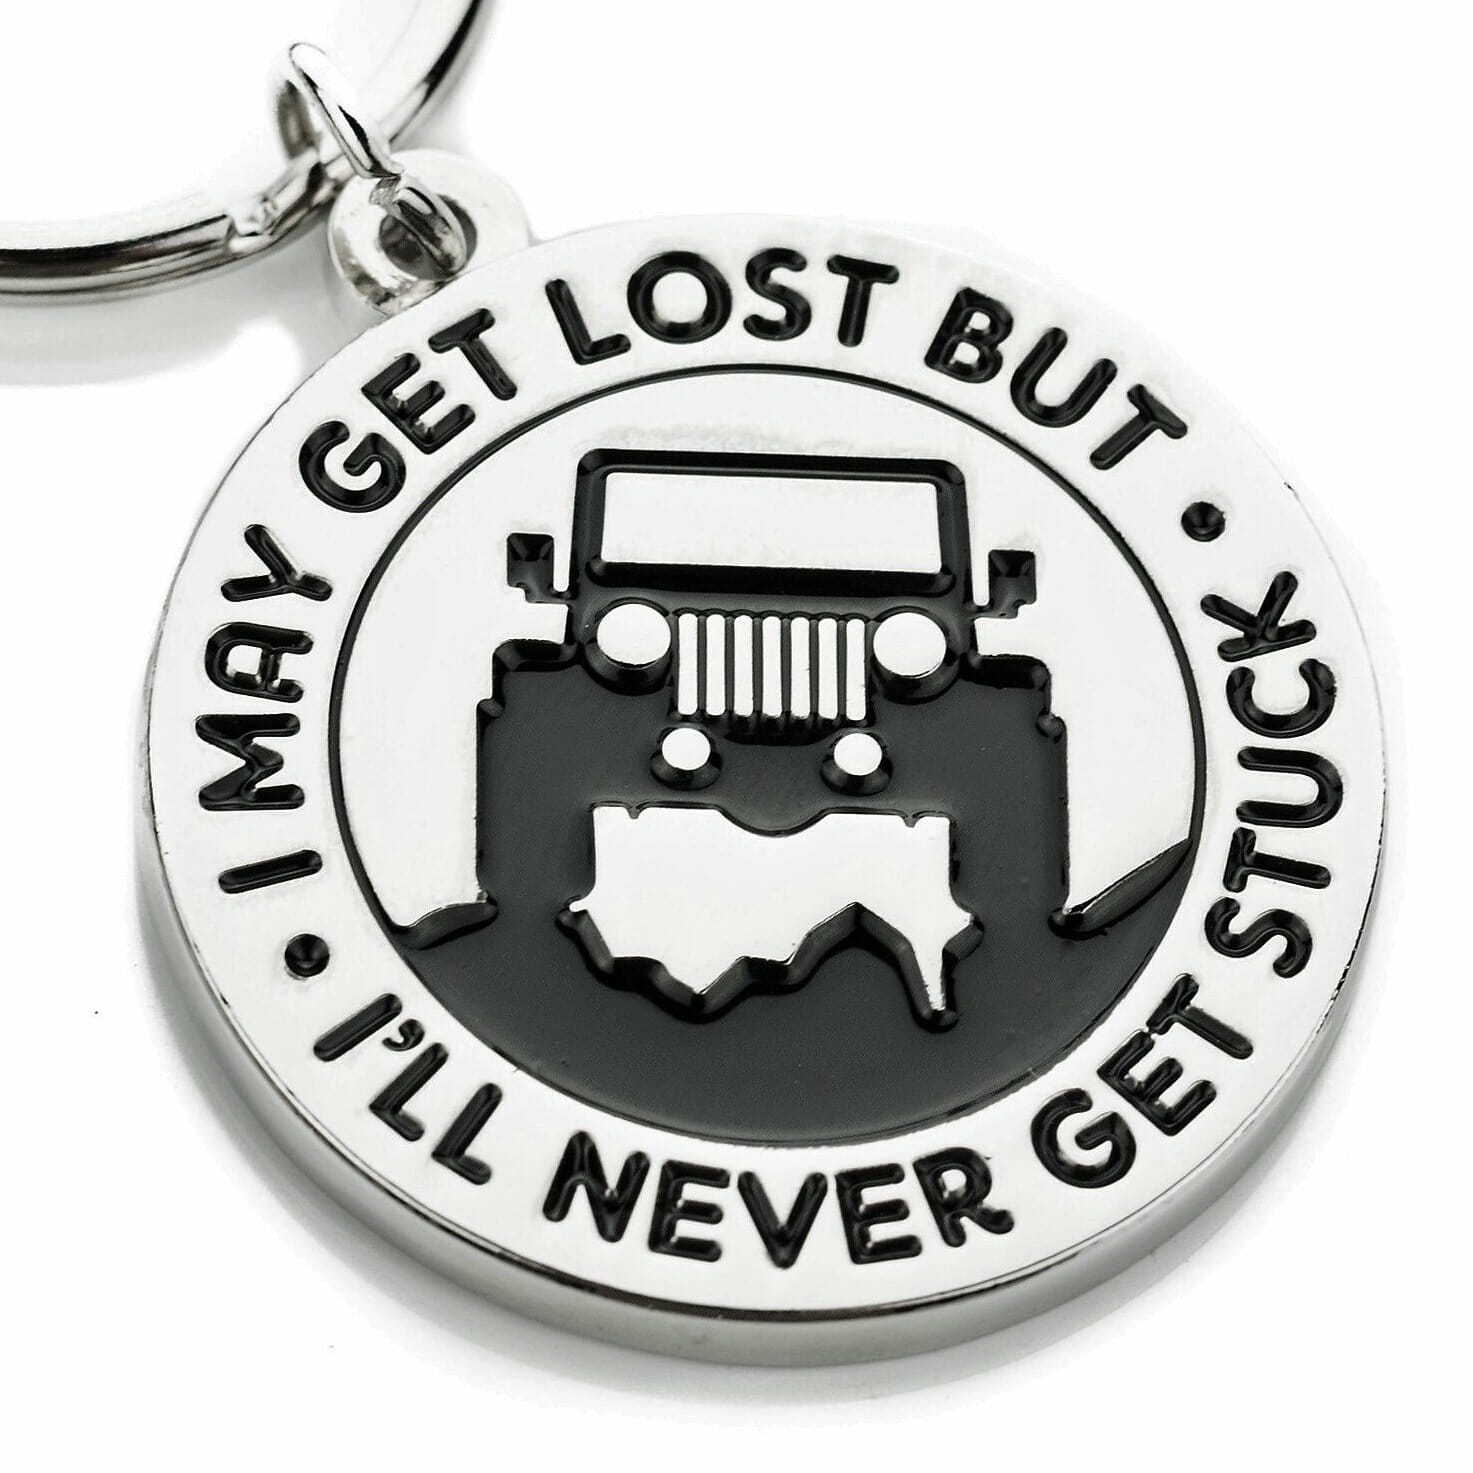 30 Great Creative Gifts for Jeep Owners - Best Choice Reviews